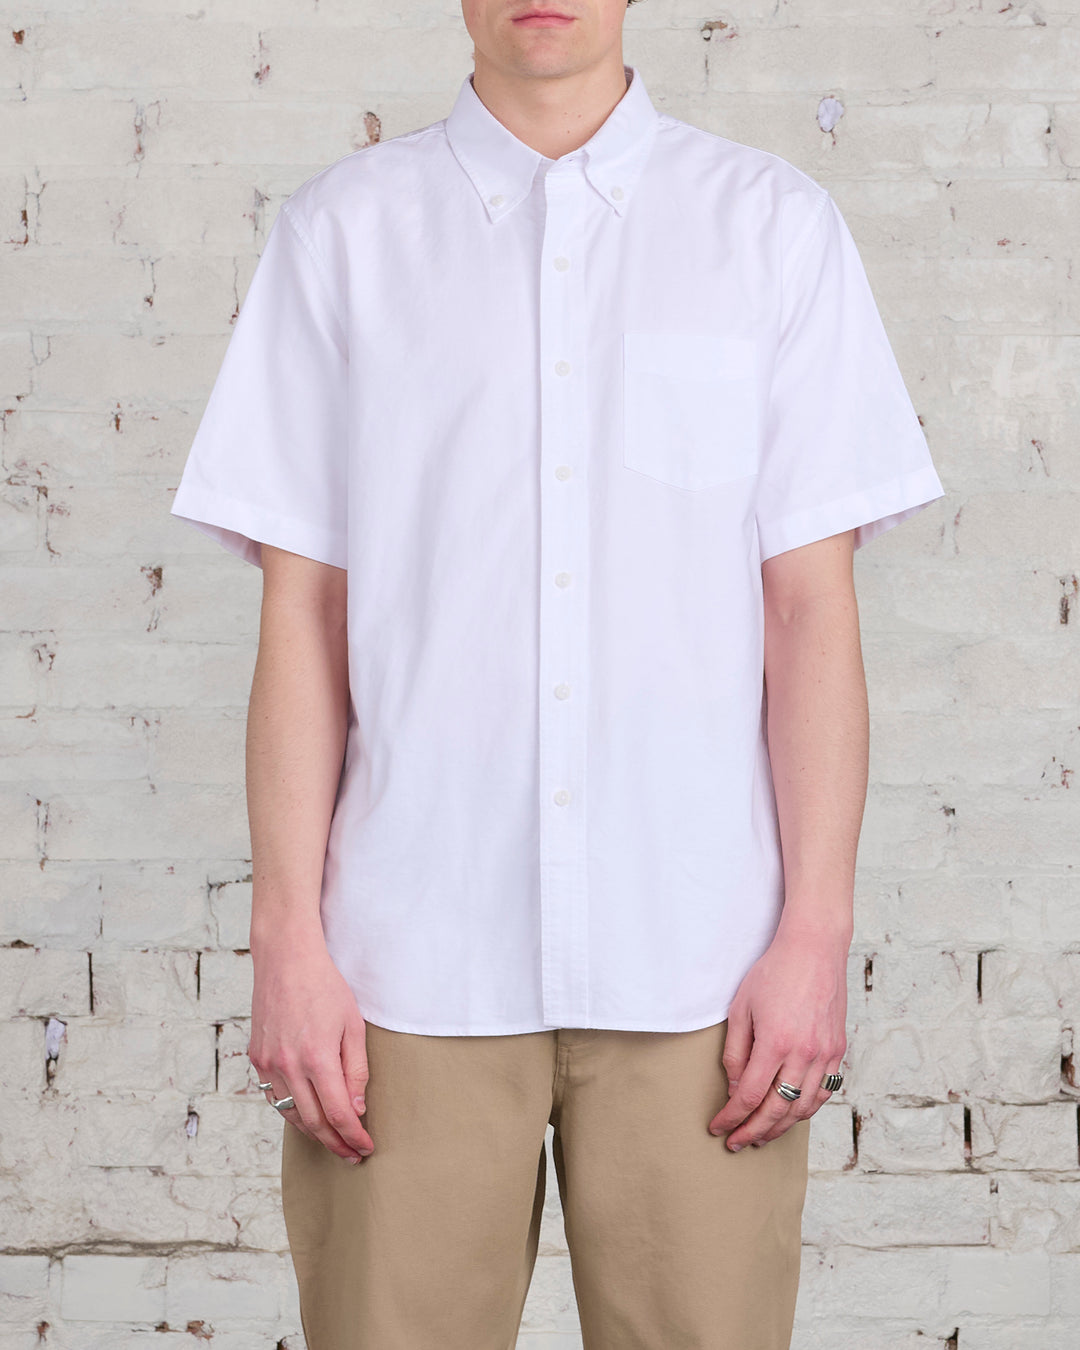 Reigning Champ Windsor Short Sleeve Oxford Button Shirt White